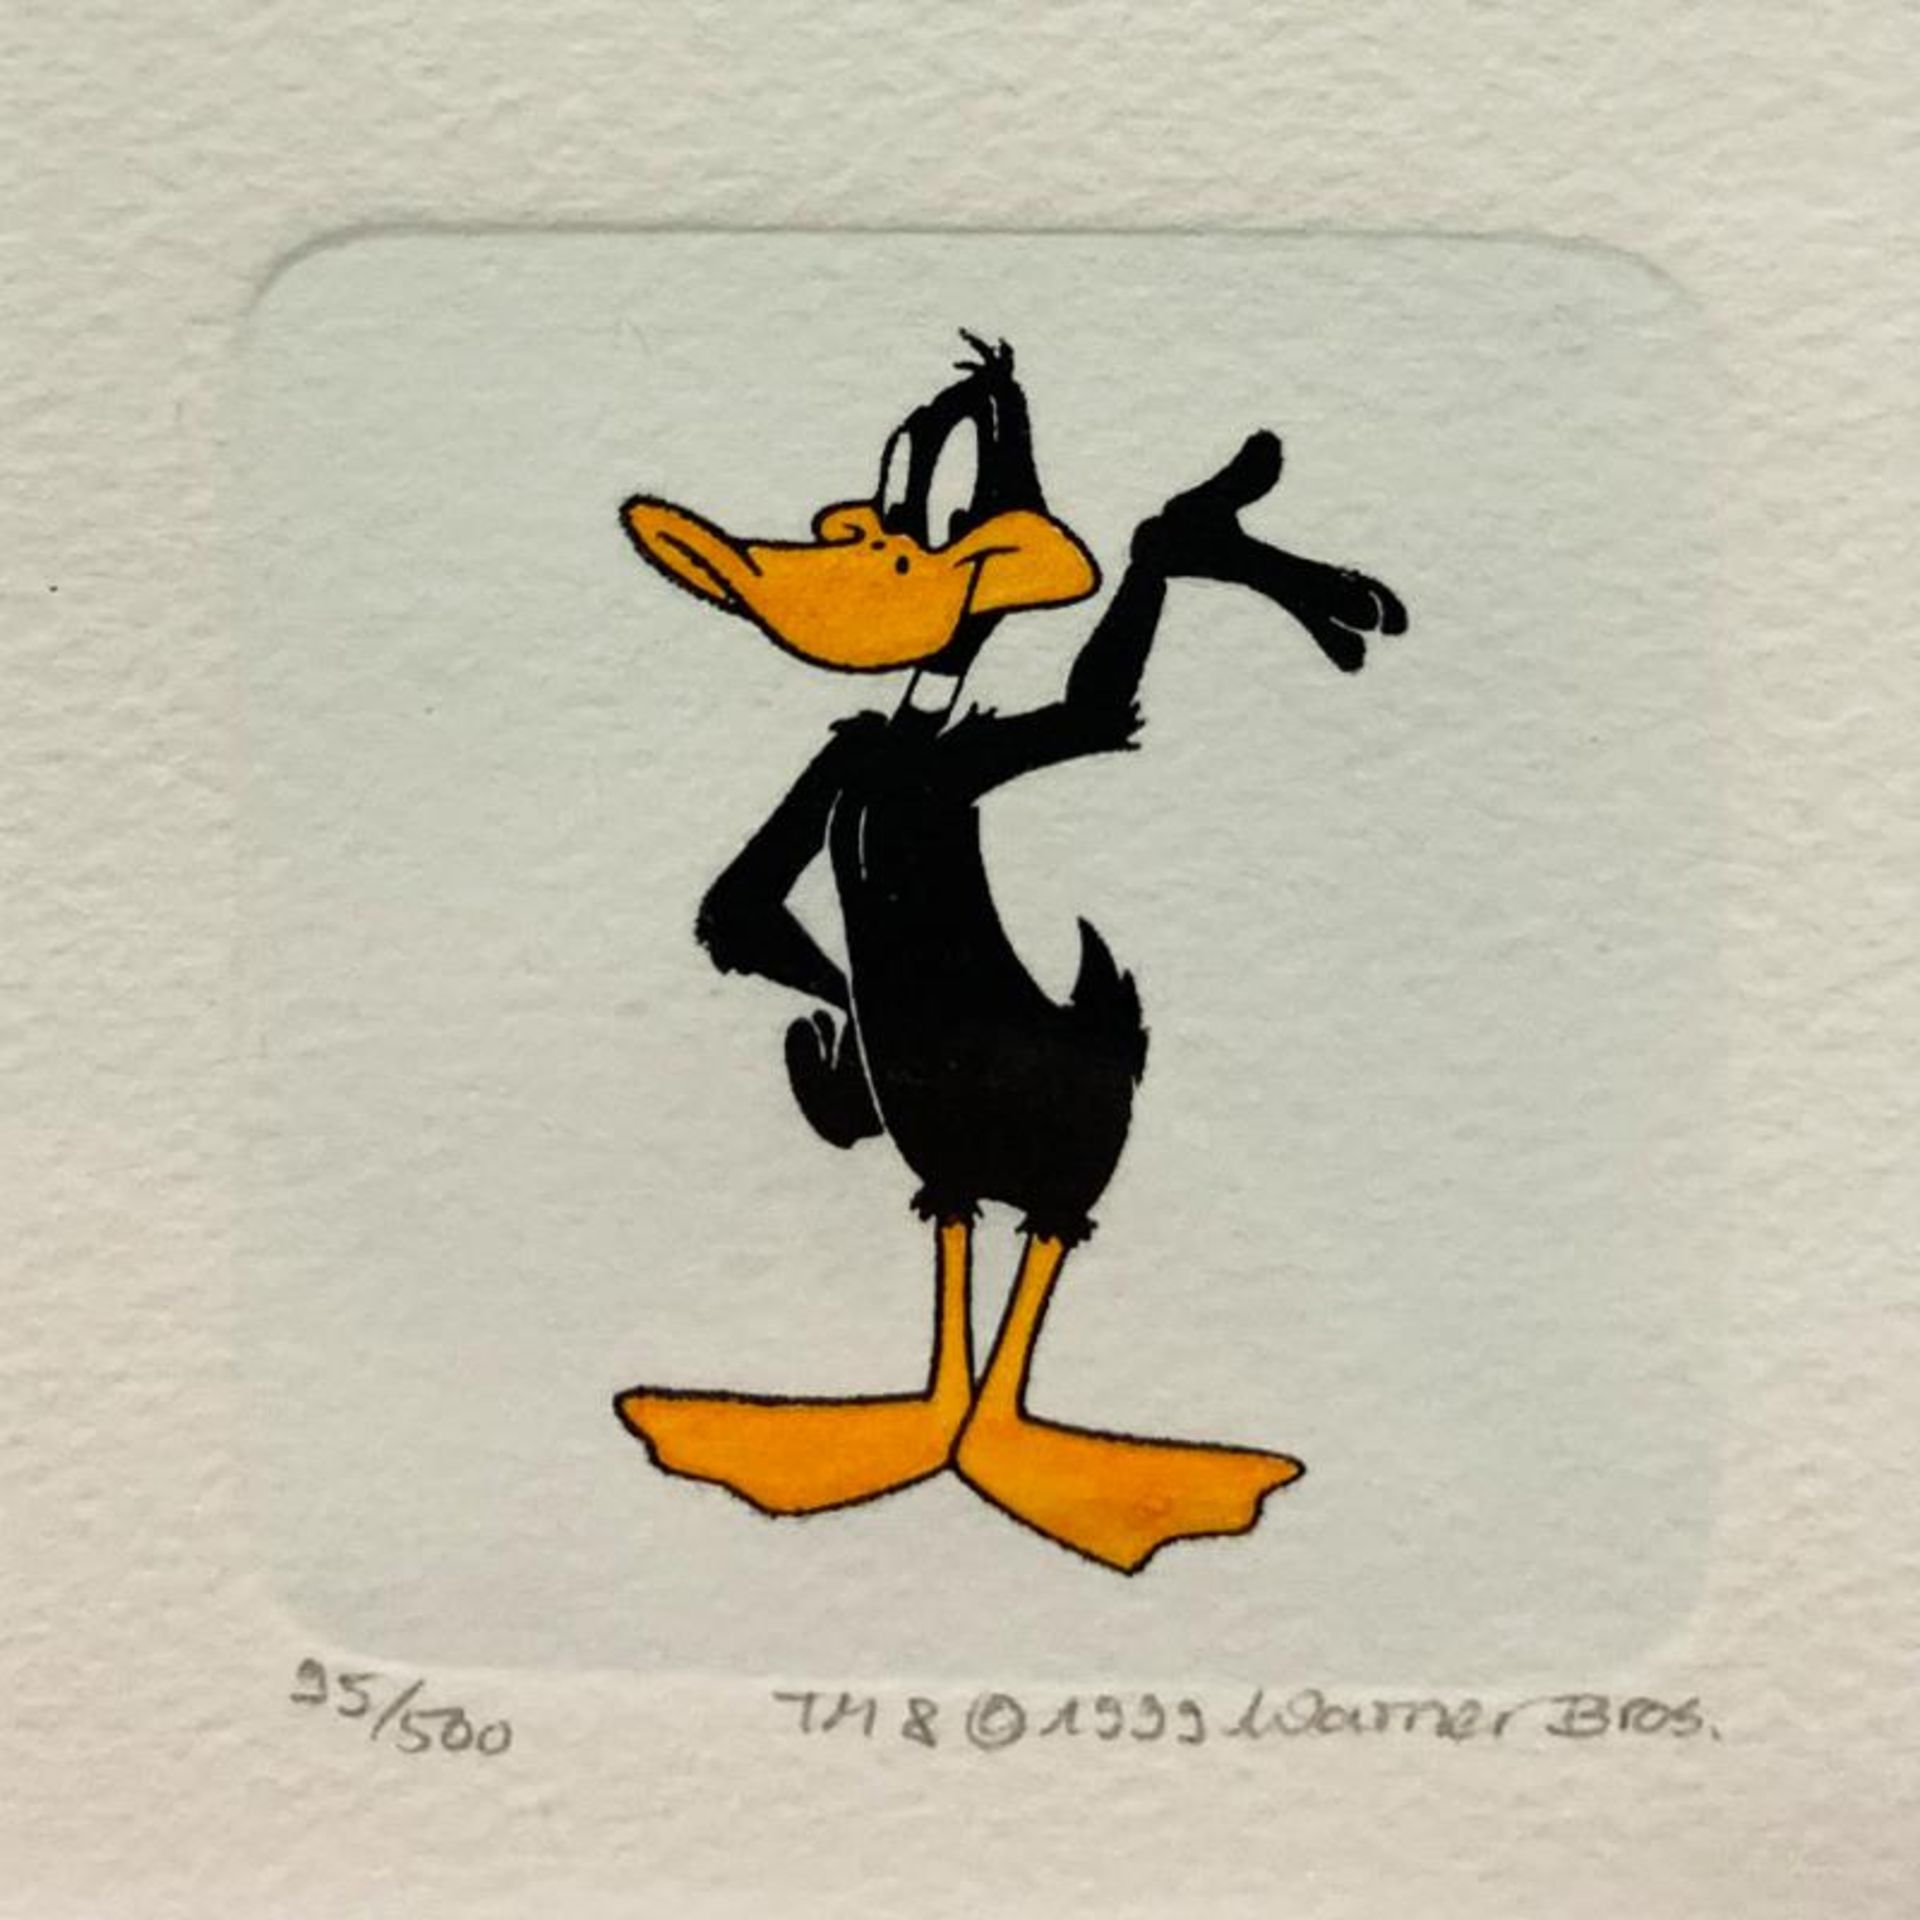 Daffy Duck by Looney Tunes - Image 2 of 2